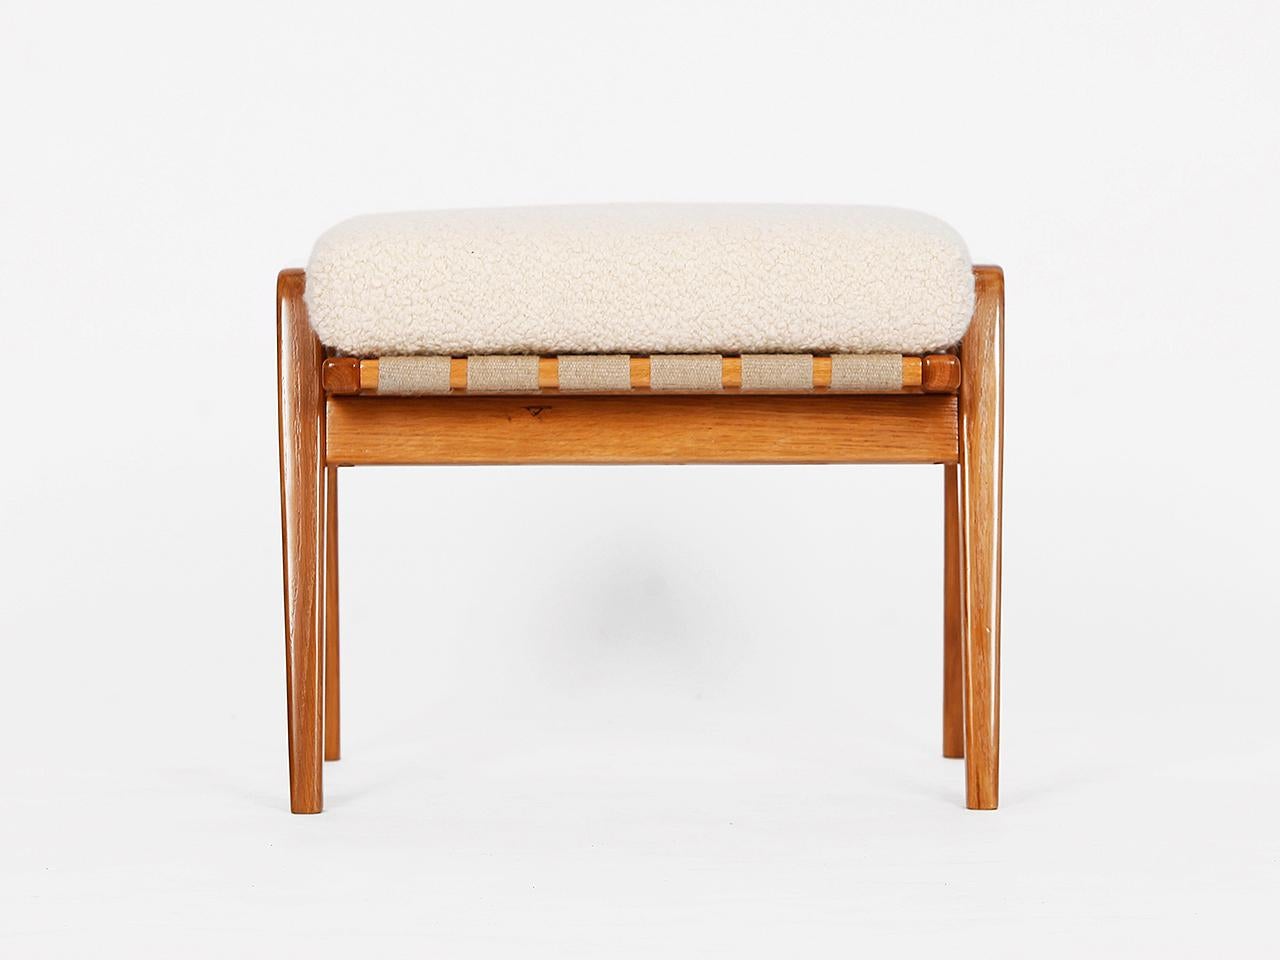 This midcentury stool footstool was made in the 1960s in former Czechoslovakia. Solid ash with hemp straps. The removable upholstery consists of a coconut fiber core, covered with a wonderful bouclé fabric made of soft wool and alpaca from the